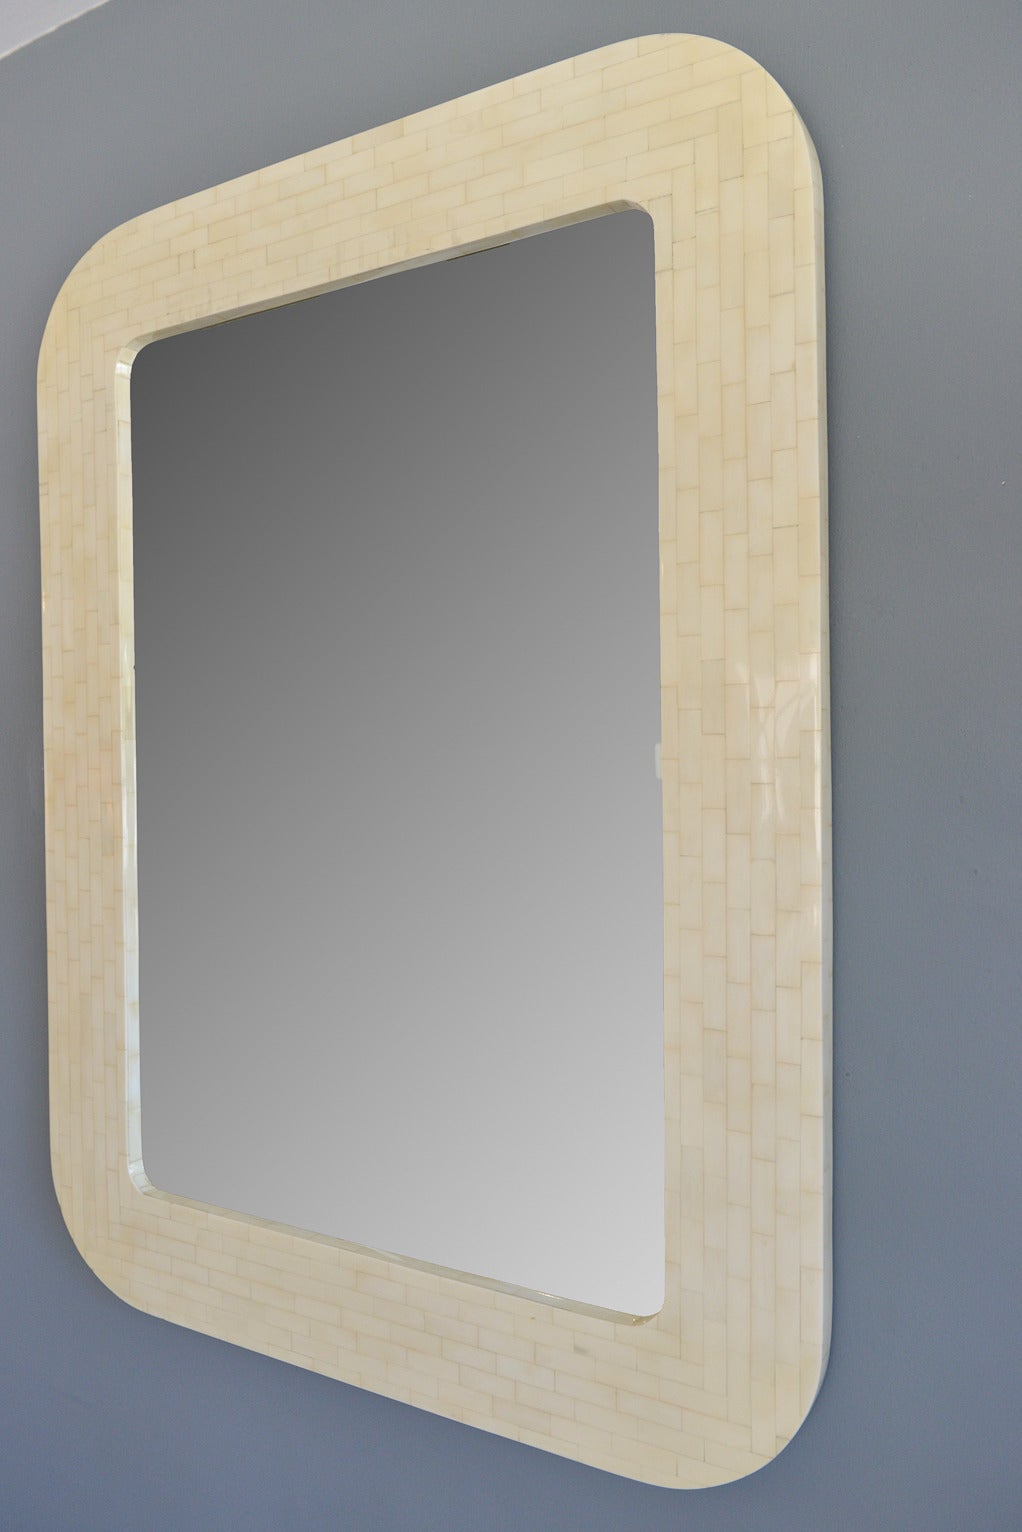 Large rectangular tessellated bone mirror attributed to Karl Springer.  Beautiful condition with no chips in the bone and the mirror is very high quality with no rippling or cracking. Substantial piece, very heavy with curbed edges and pre-installed